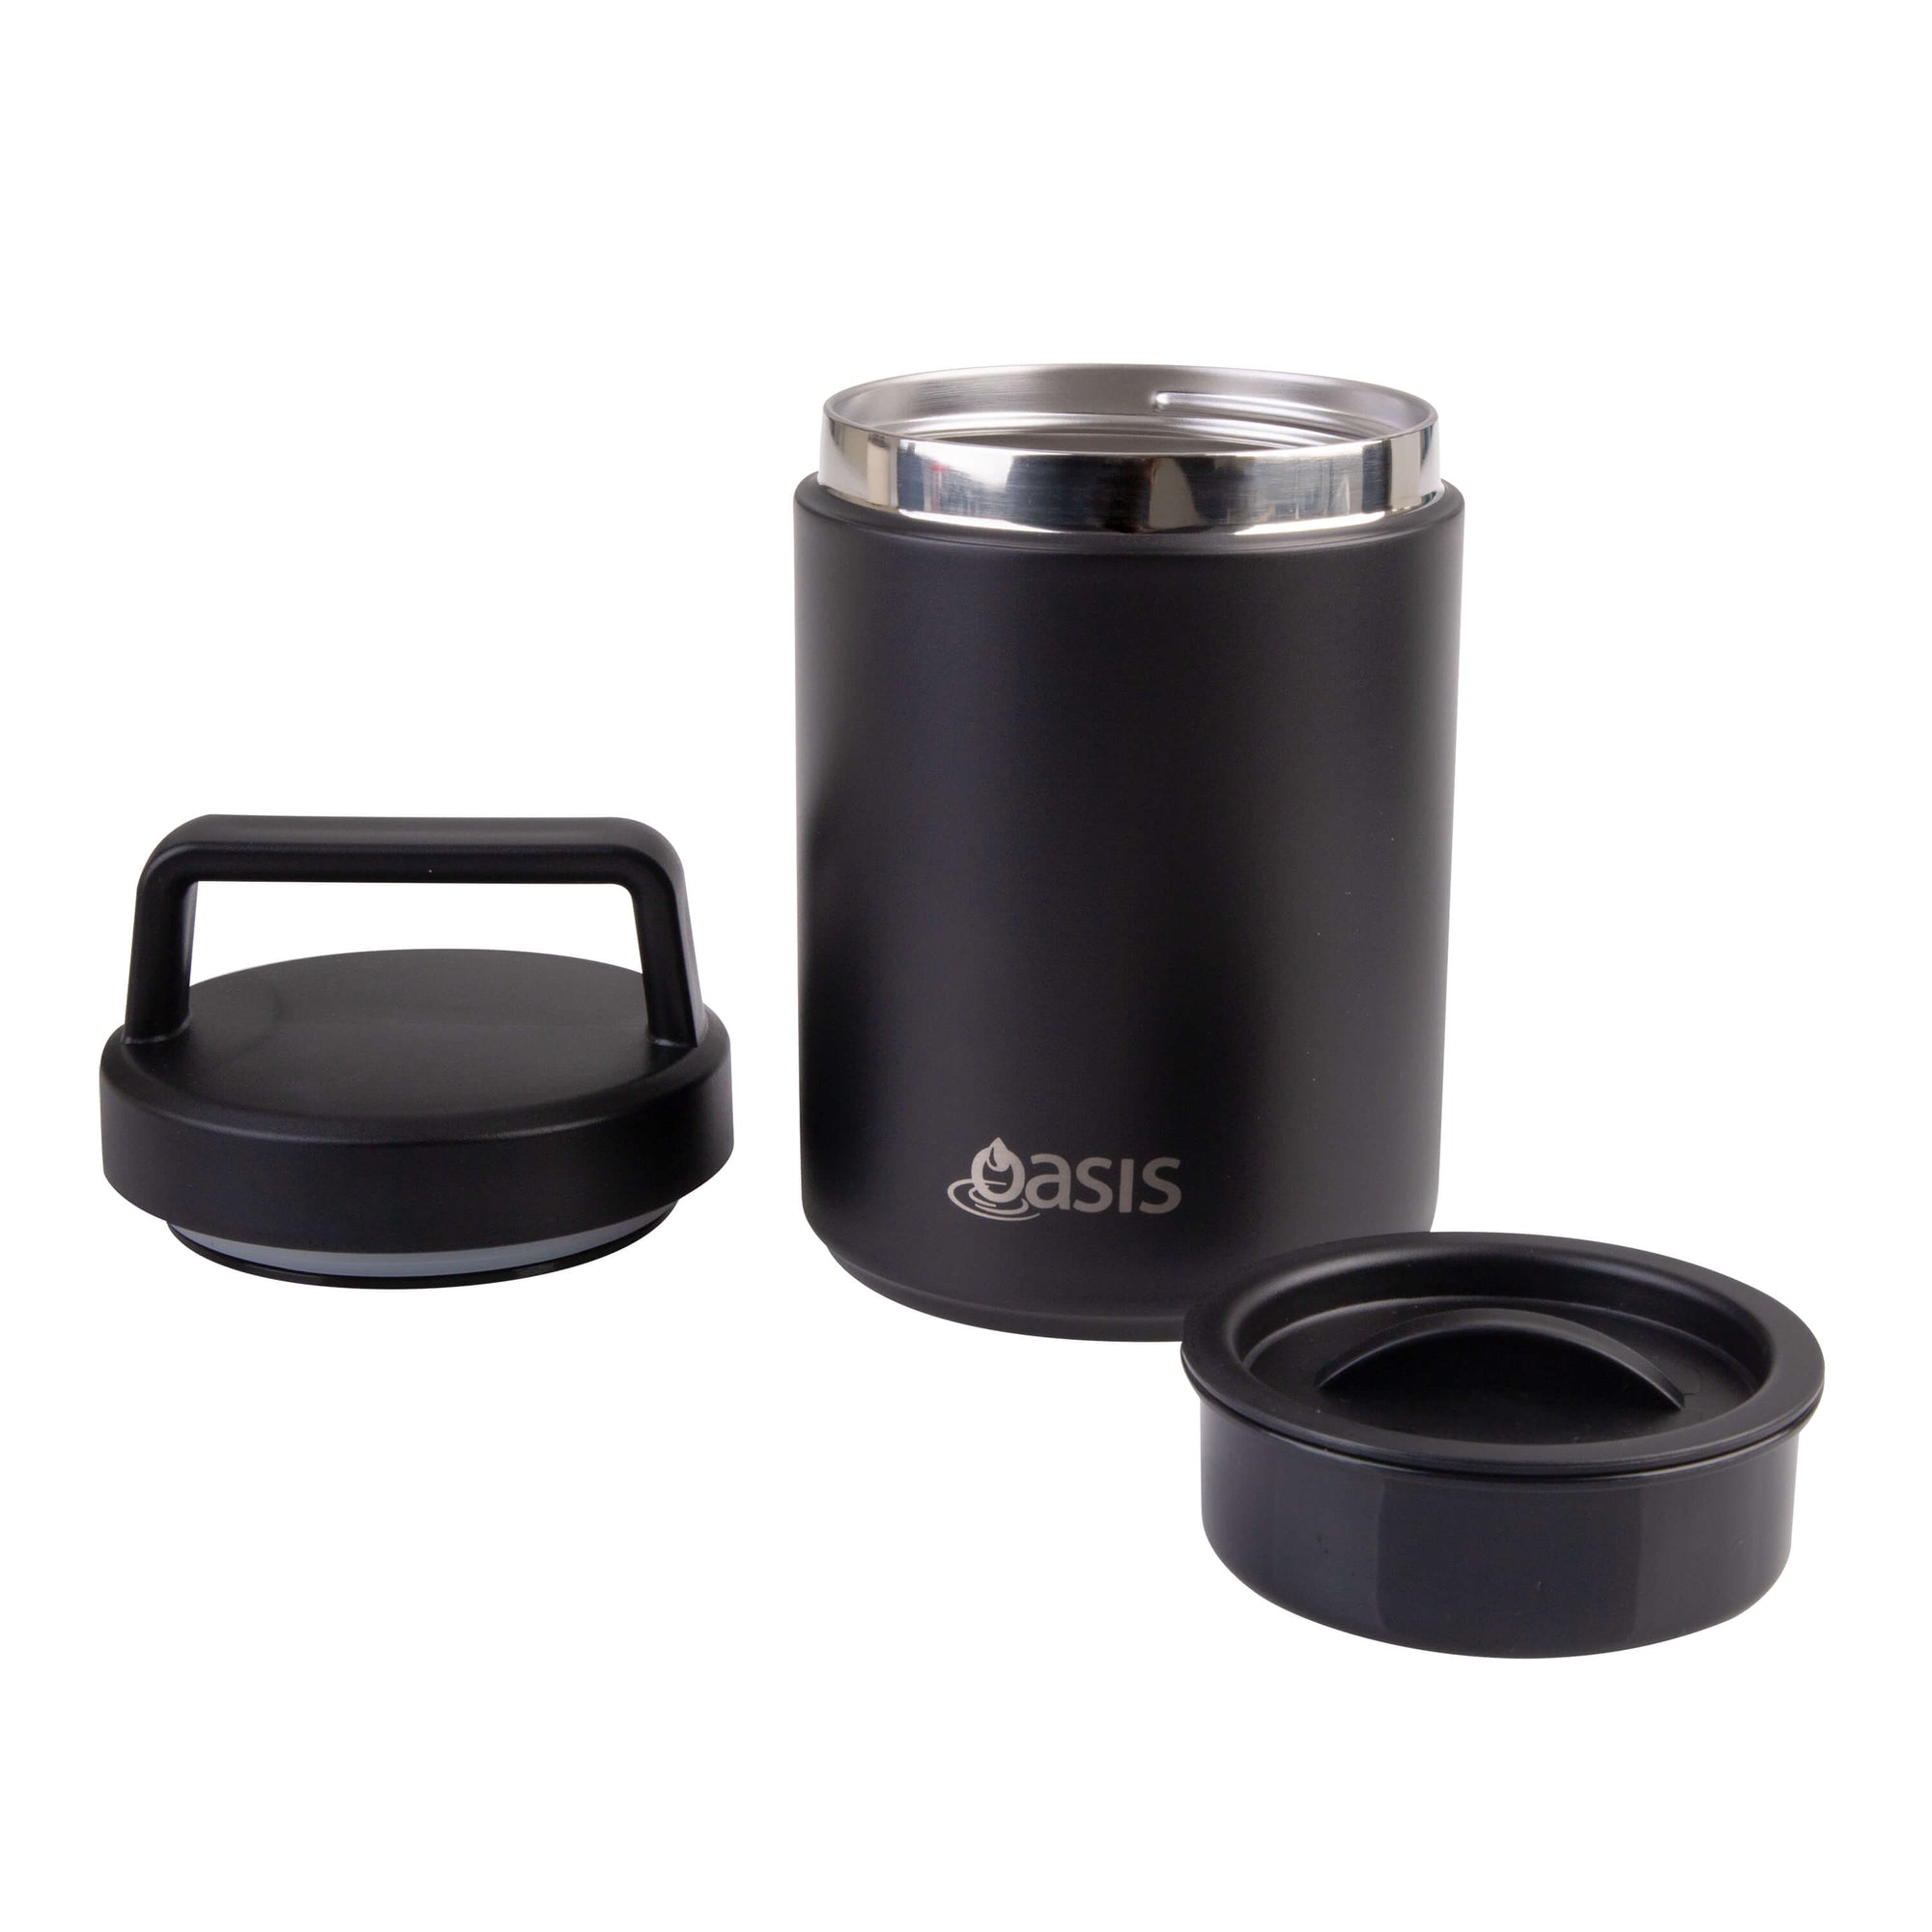 Double Wall Insulated Food Flask 480mL Matte Black - LIFESTYLE - Lunch - Soko and Co